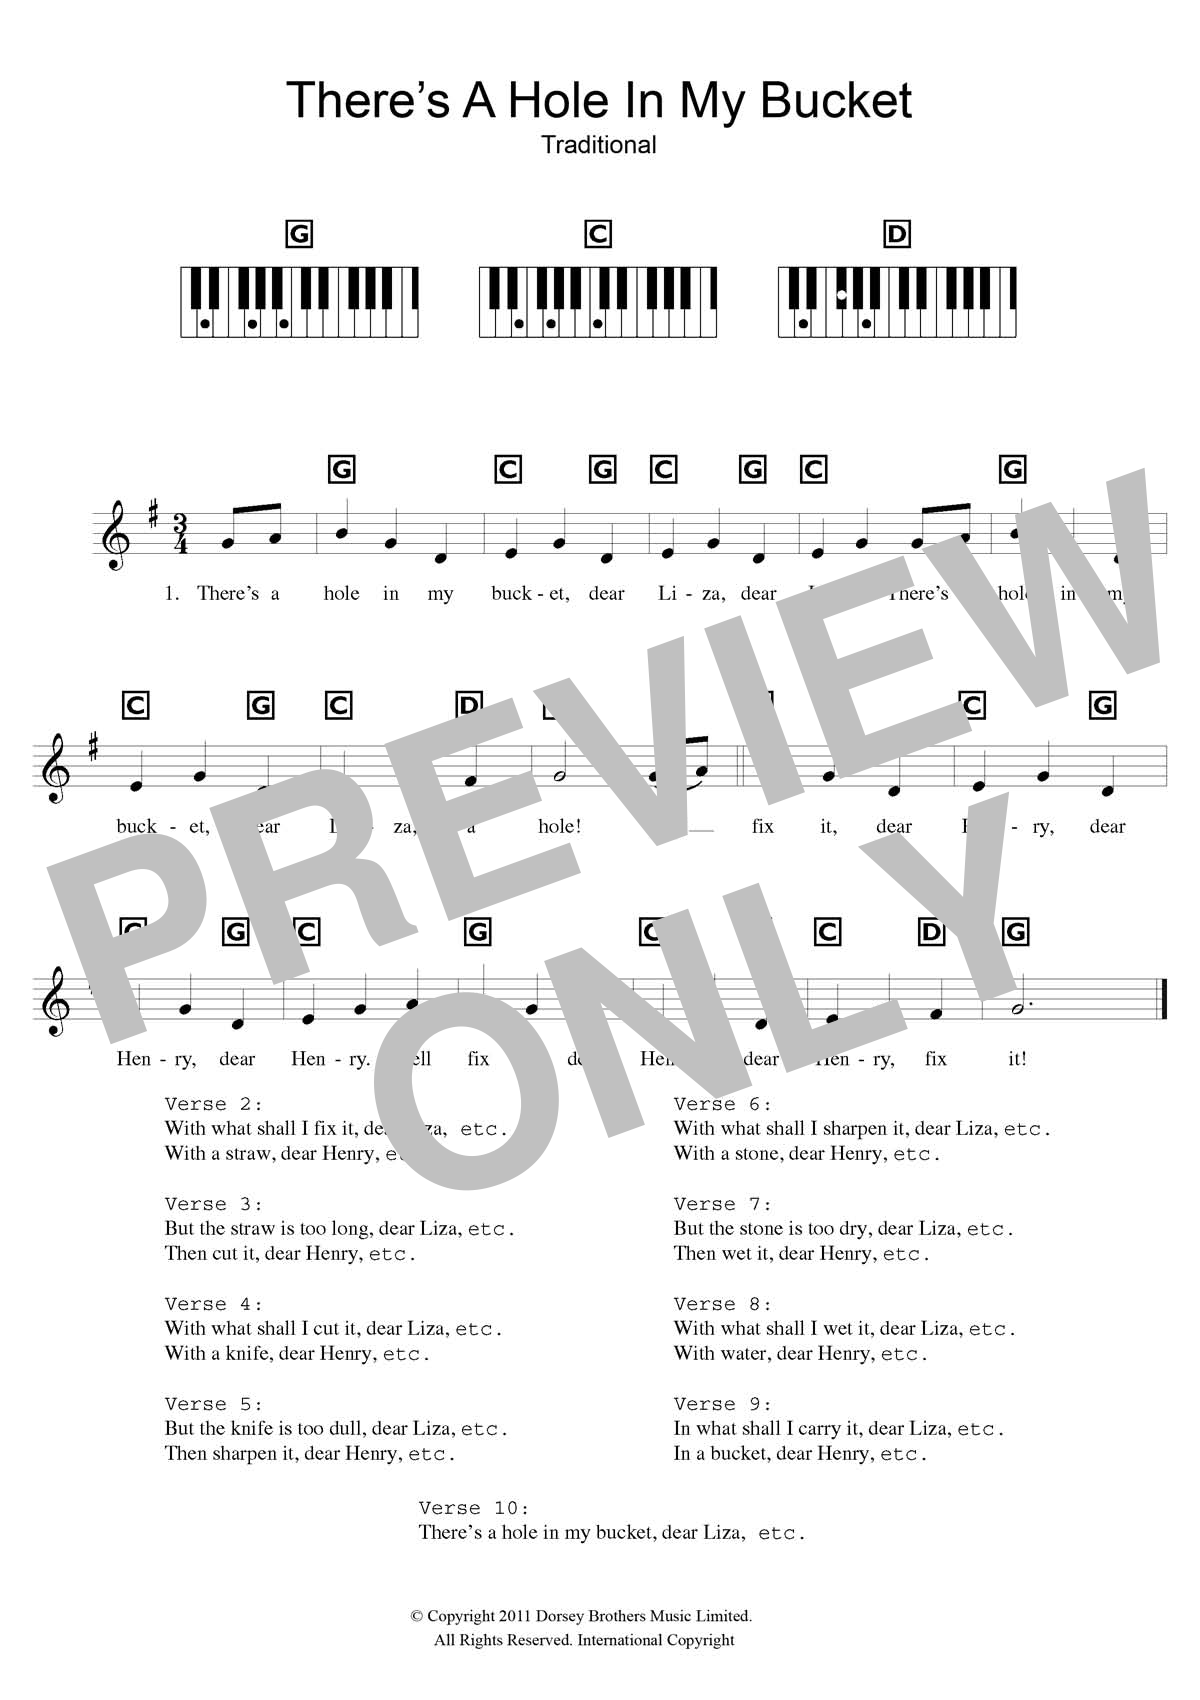 Download Traditional There's A Hole In My Bucket Sheet Music